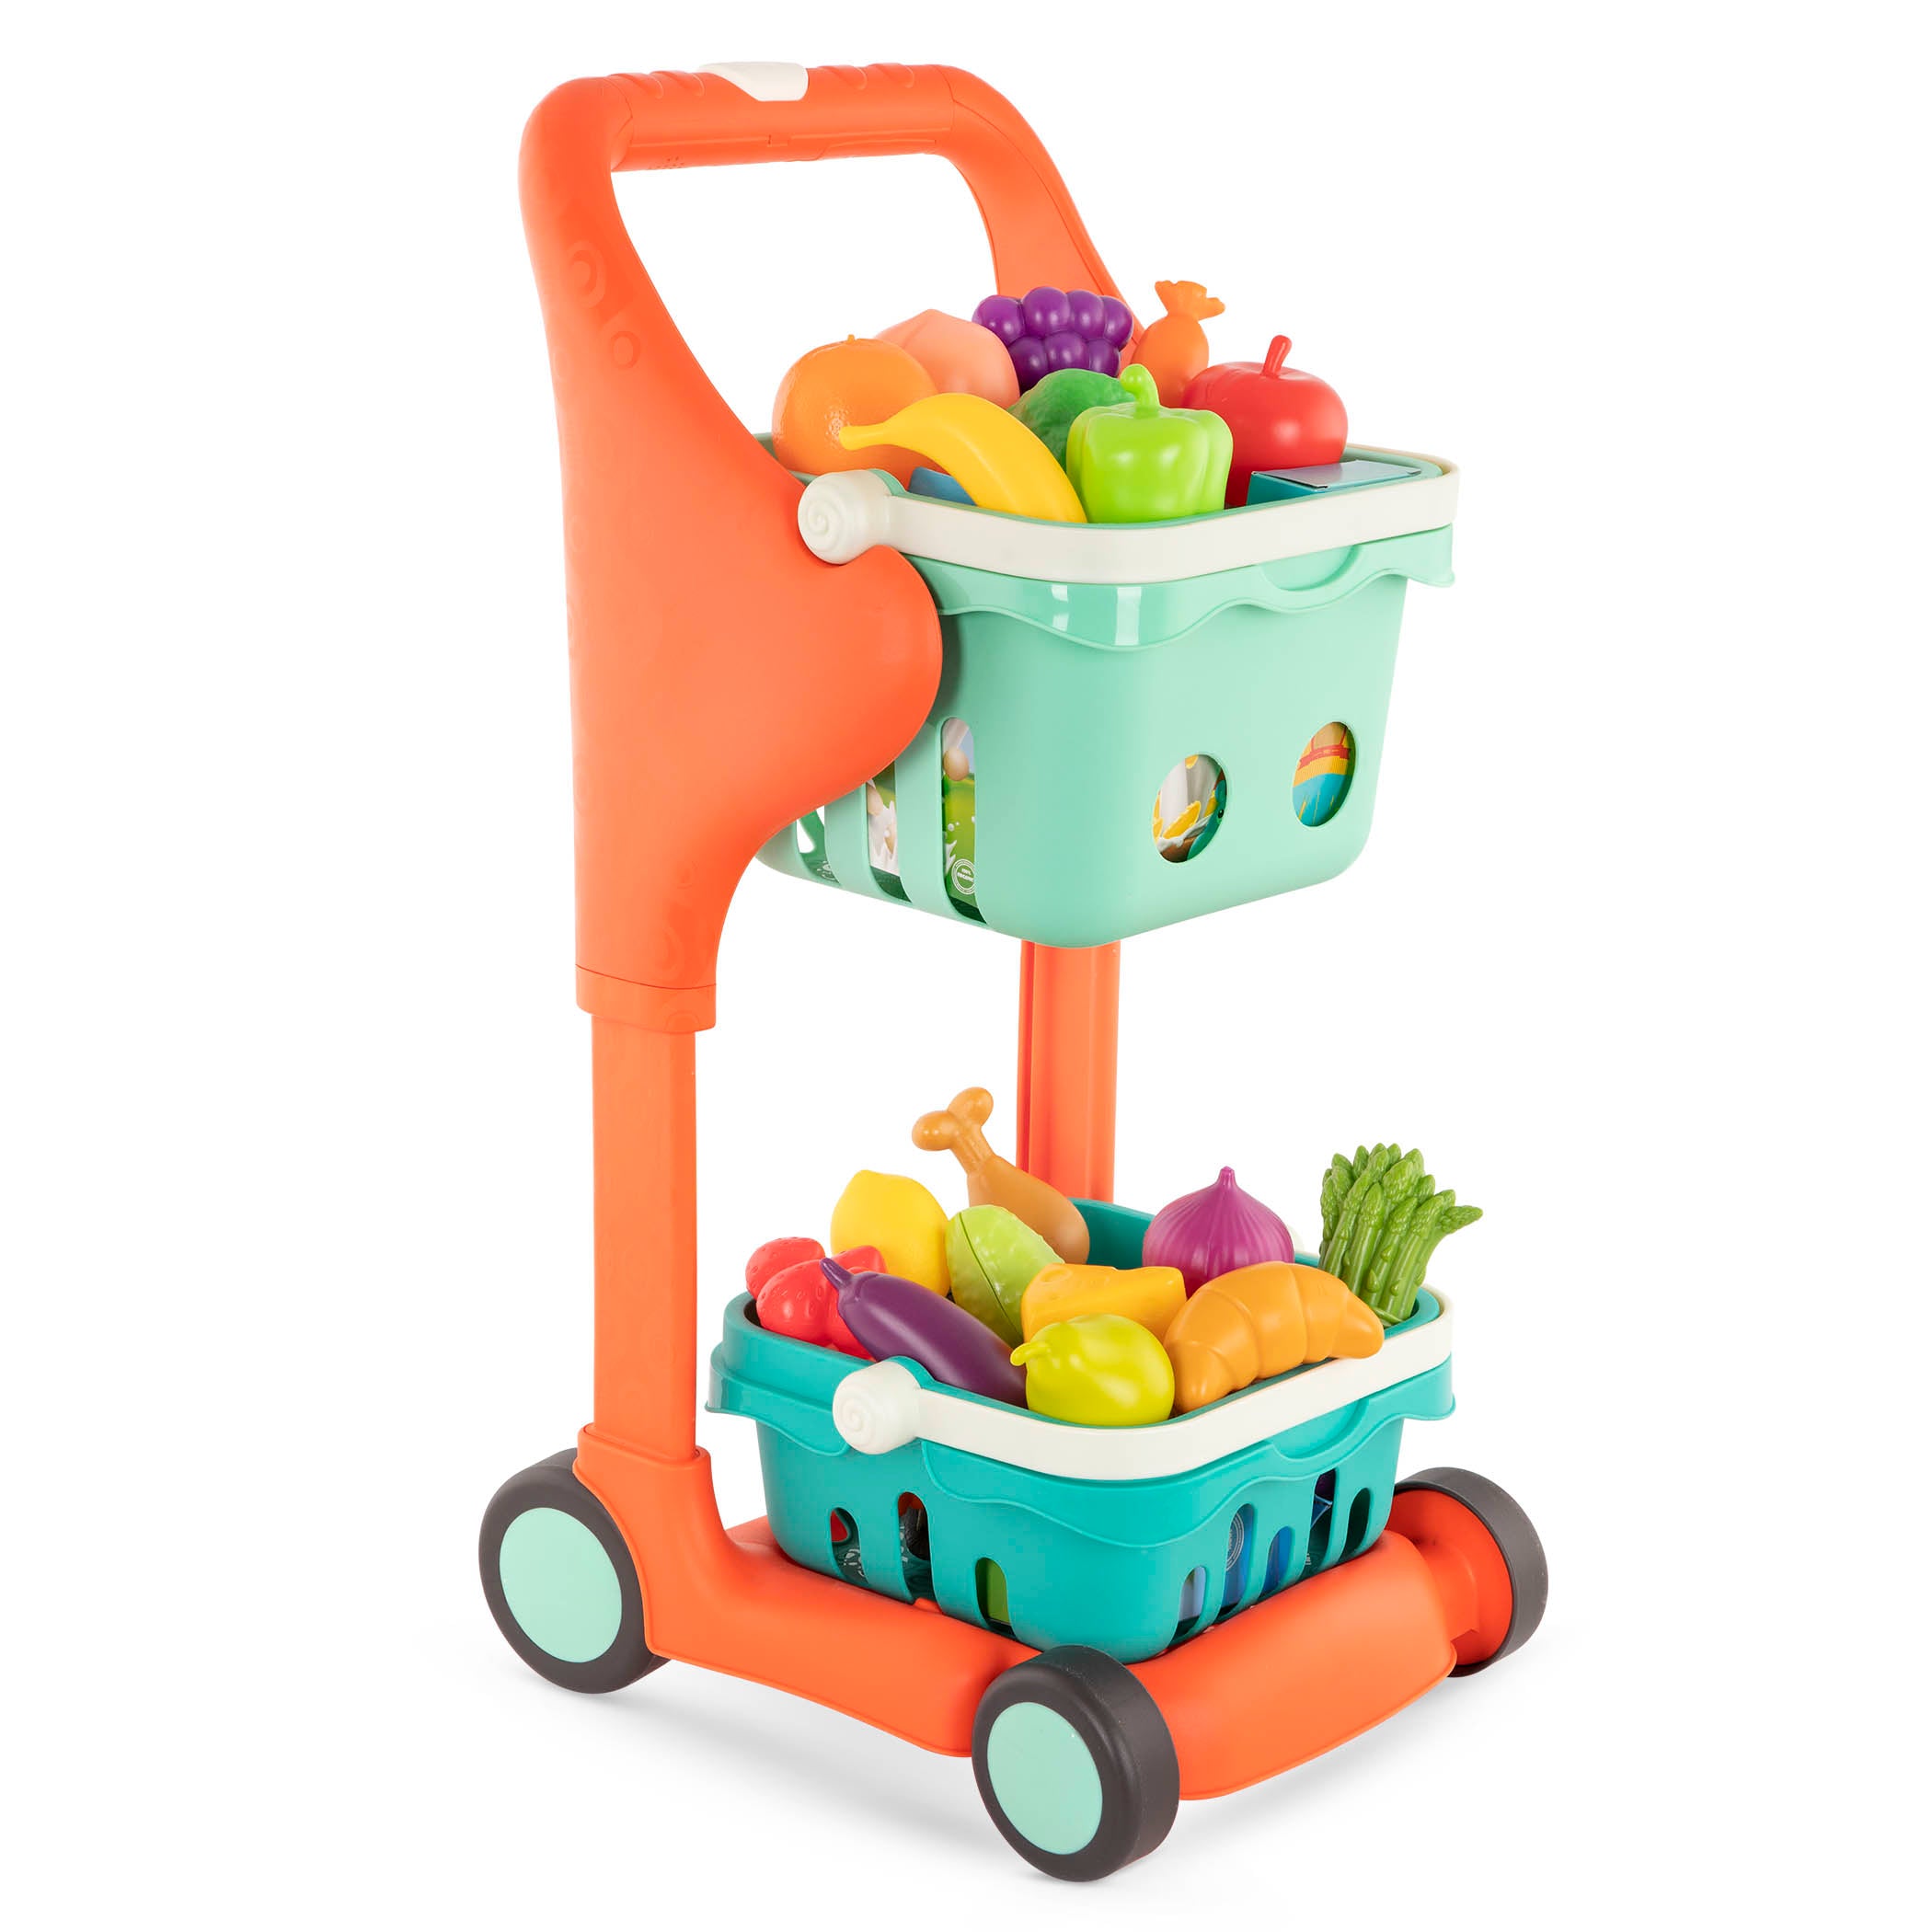 Toy shopping cart with play food.